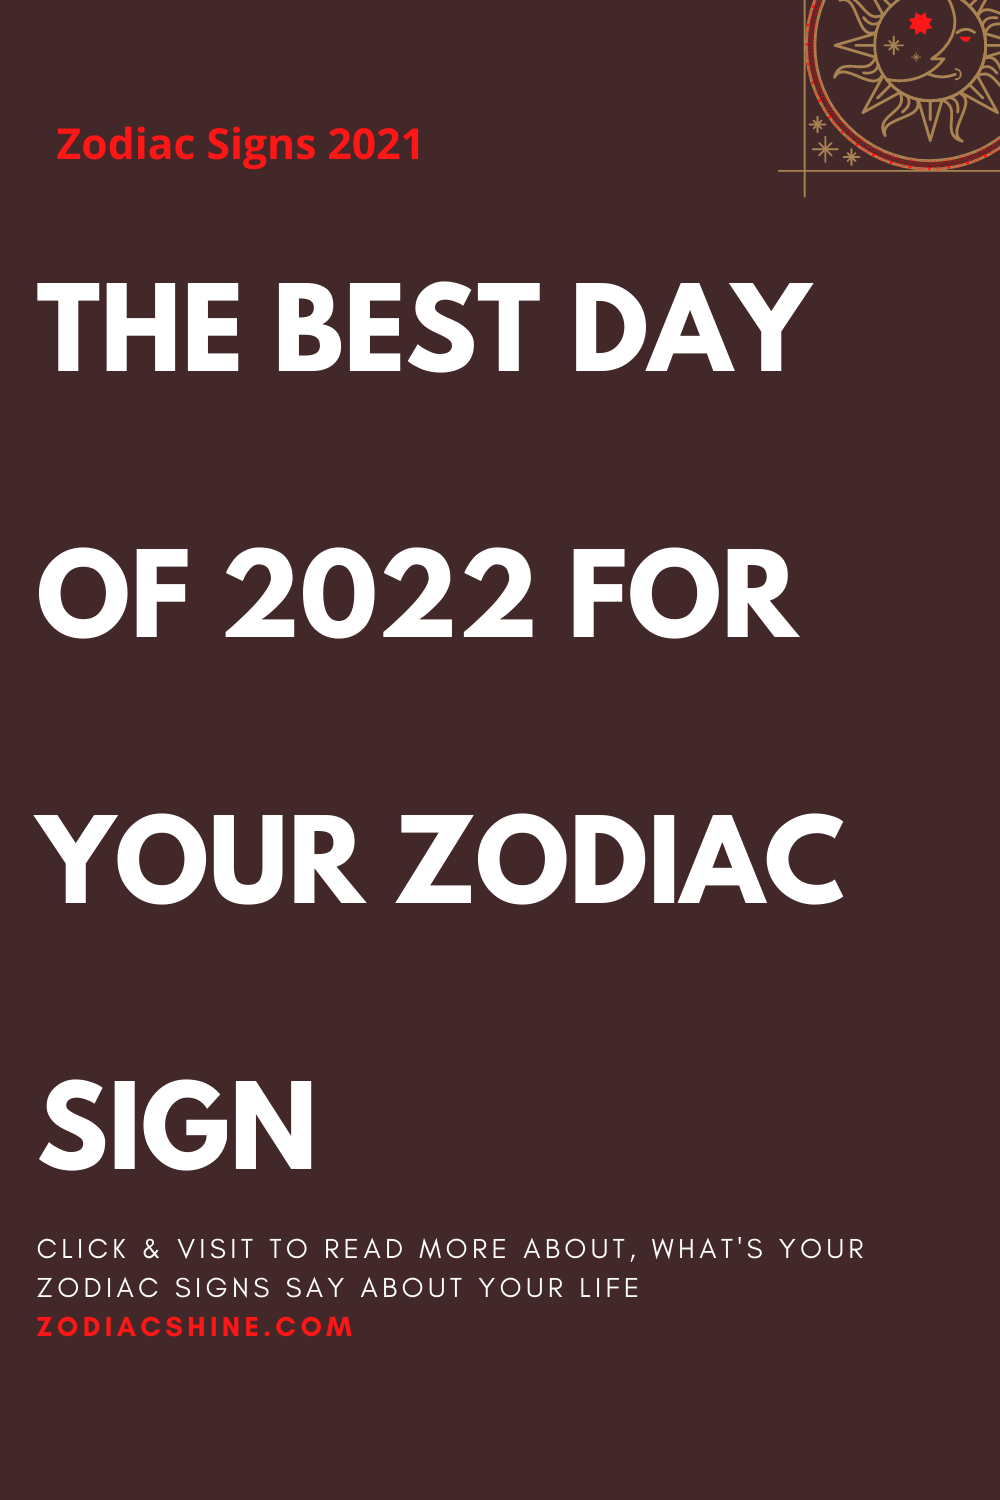 THE BEST DAY OF 2022 FOR YOUR ZODIAC SIGN